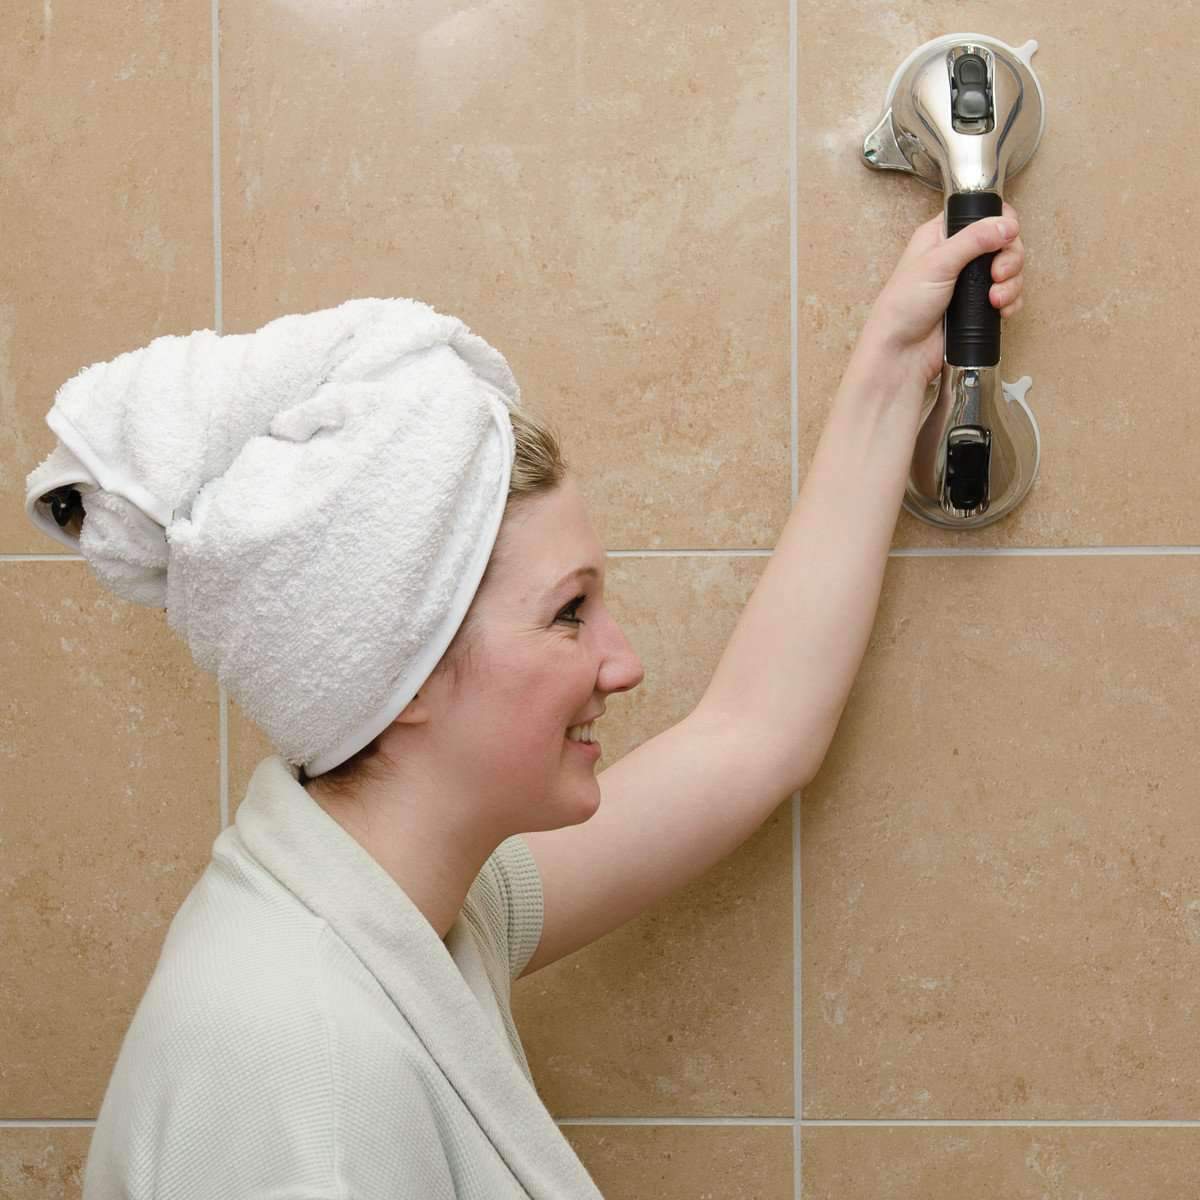 HealthSmart Suction Cup Grab Bars with Germ-Free Protection - Senior.com Grab Bars & Safety Rails